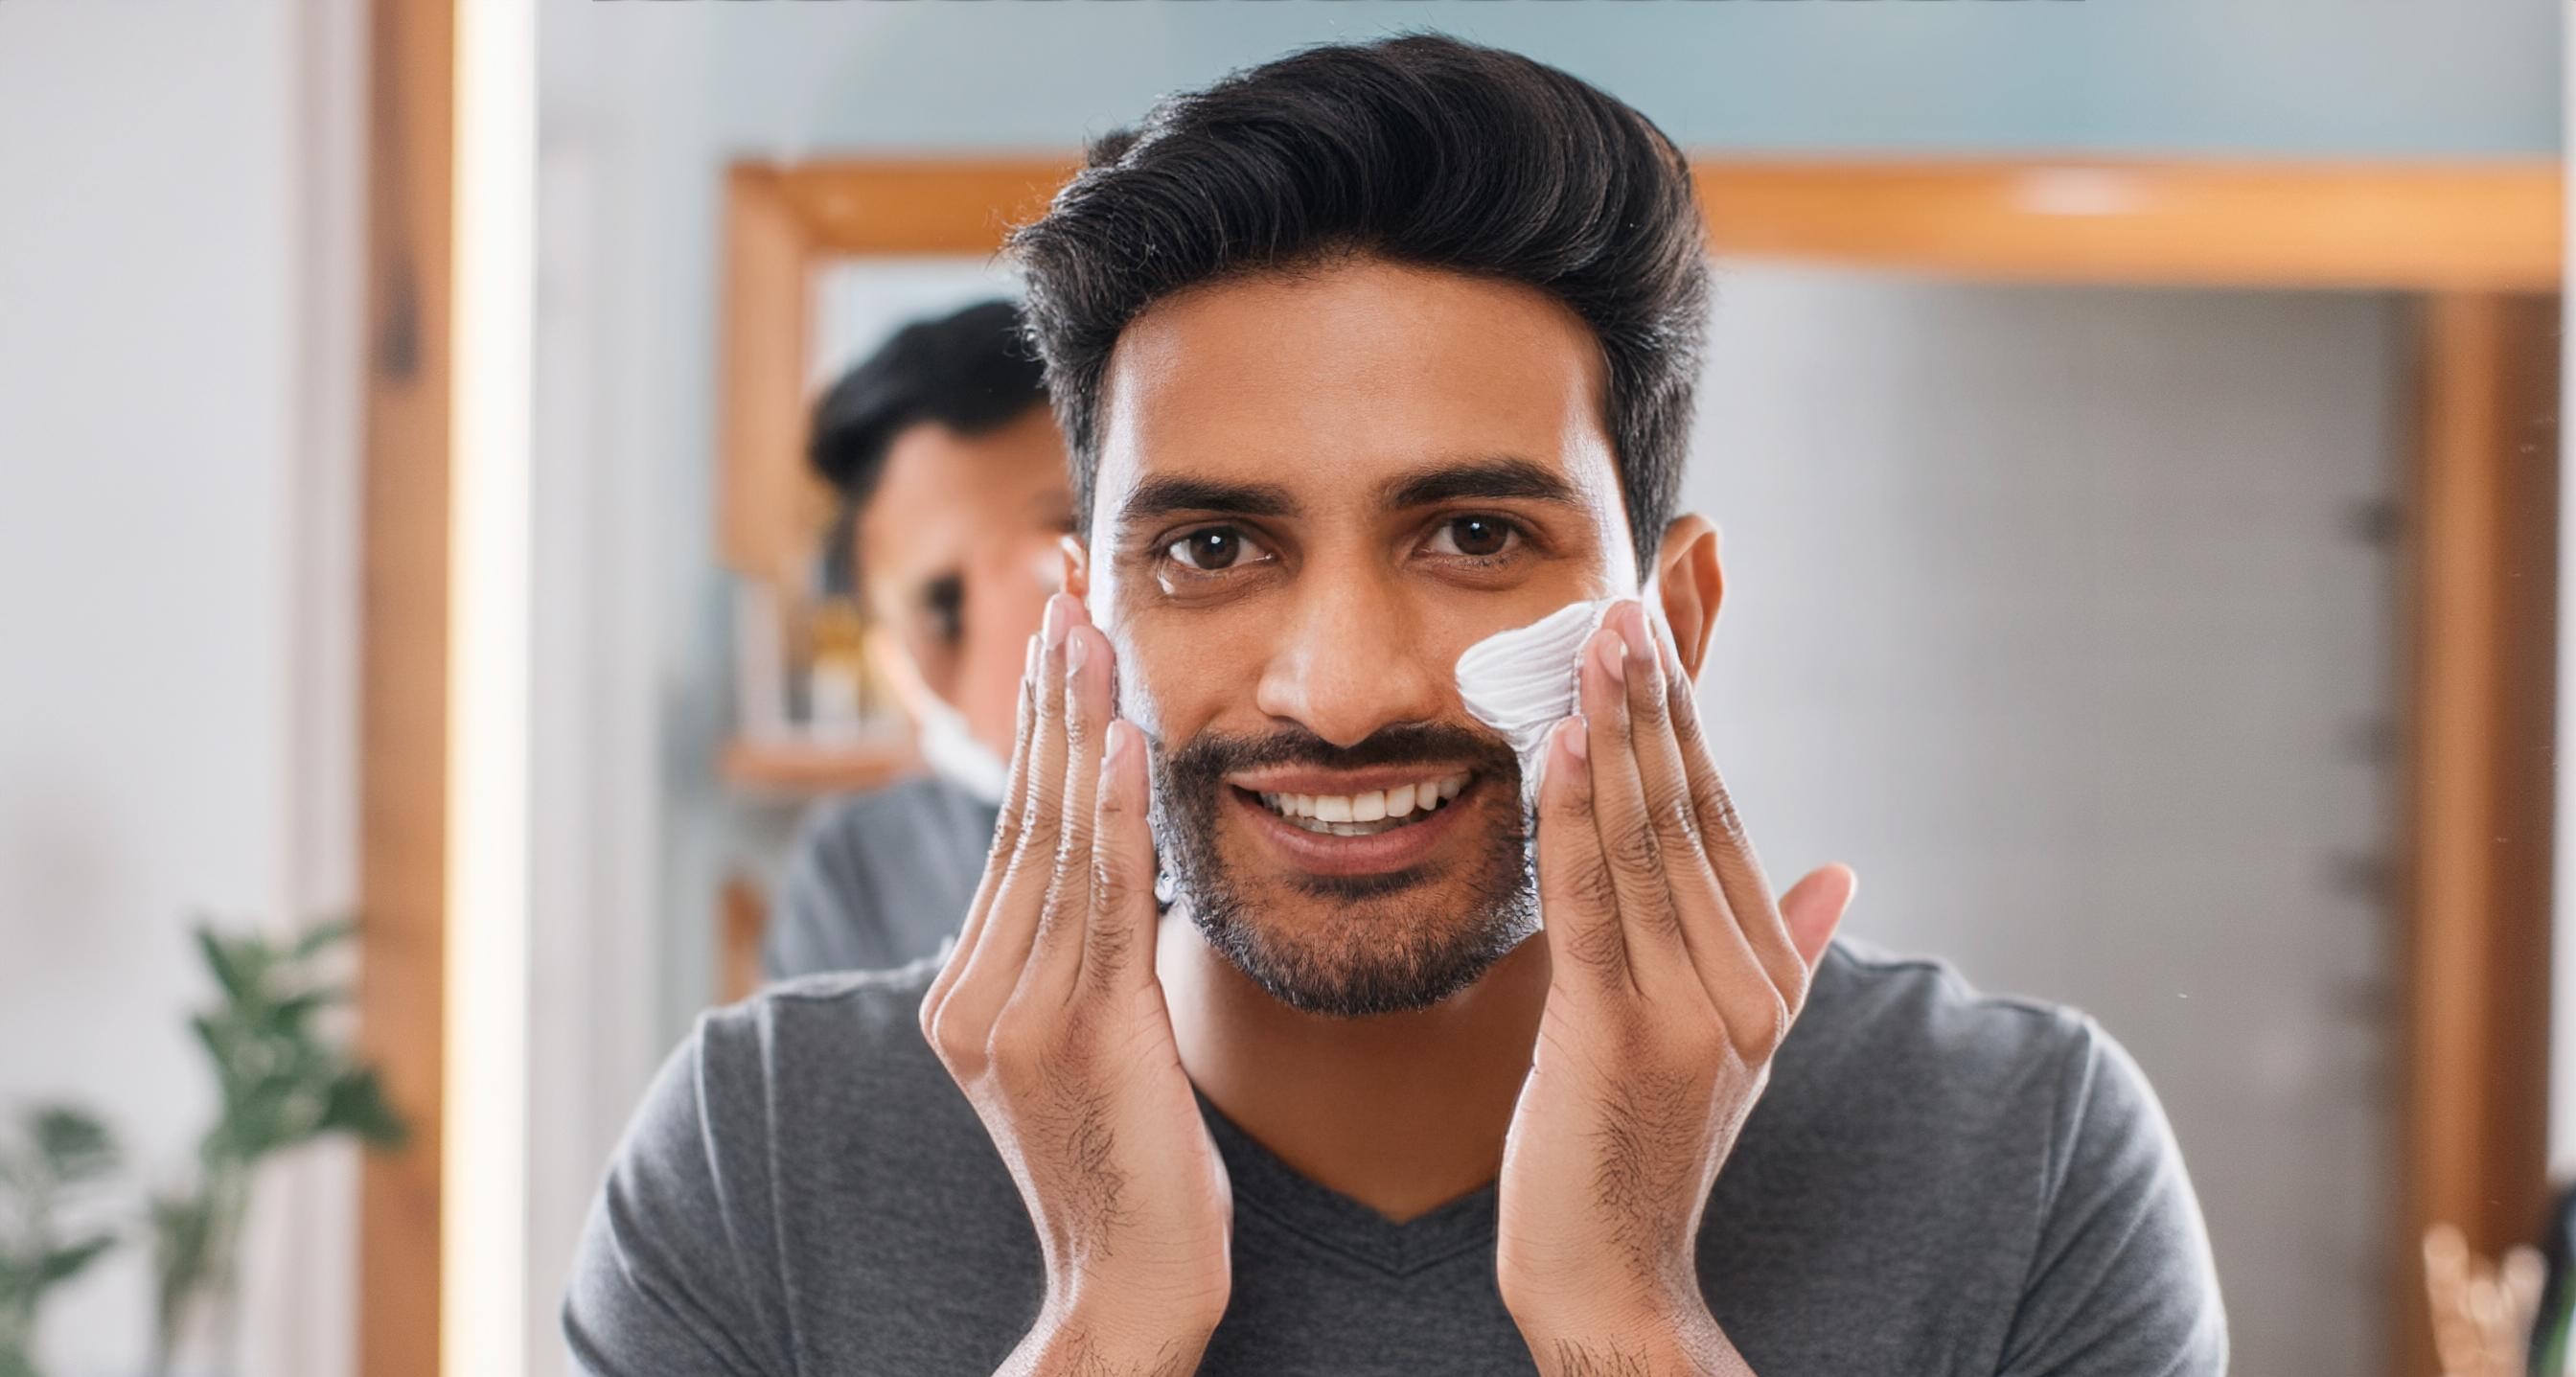 4 Step Skincare Routine For Men